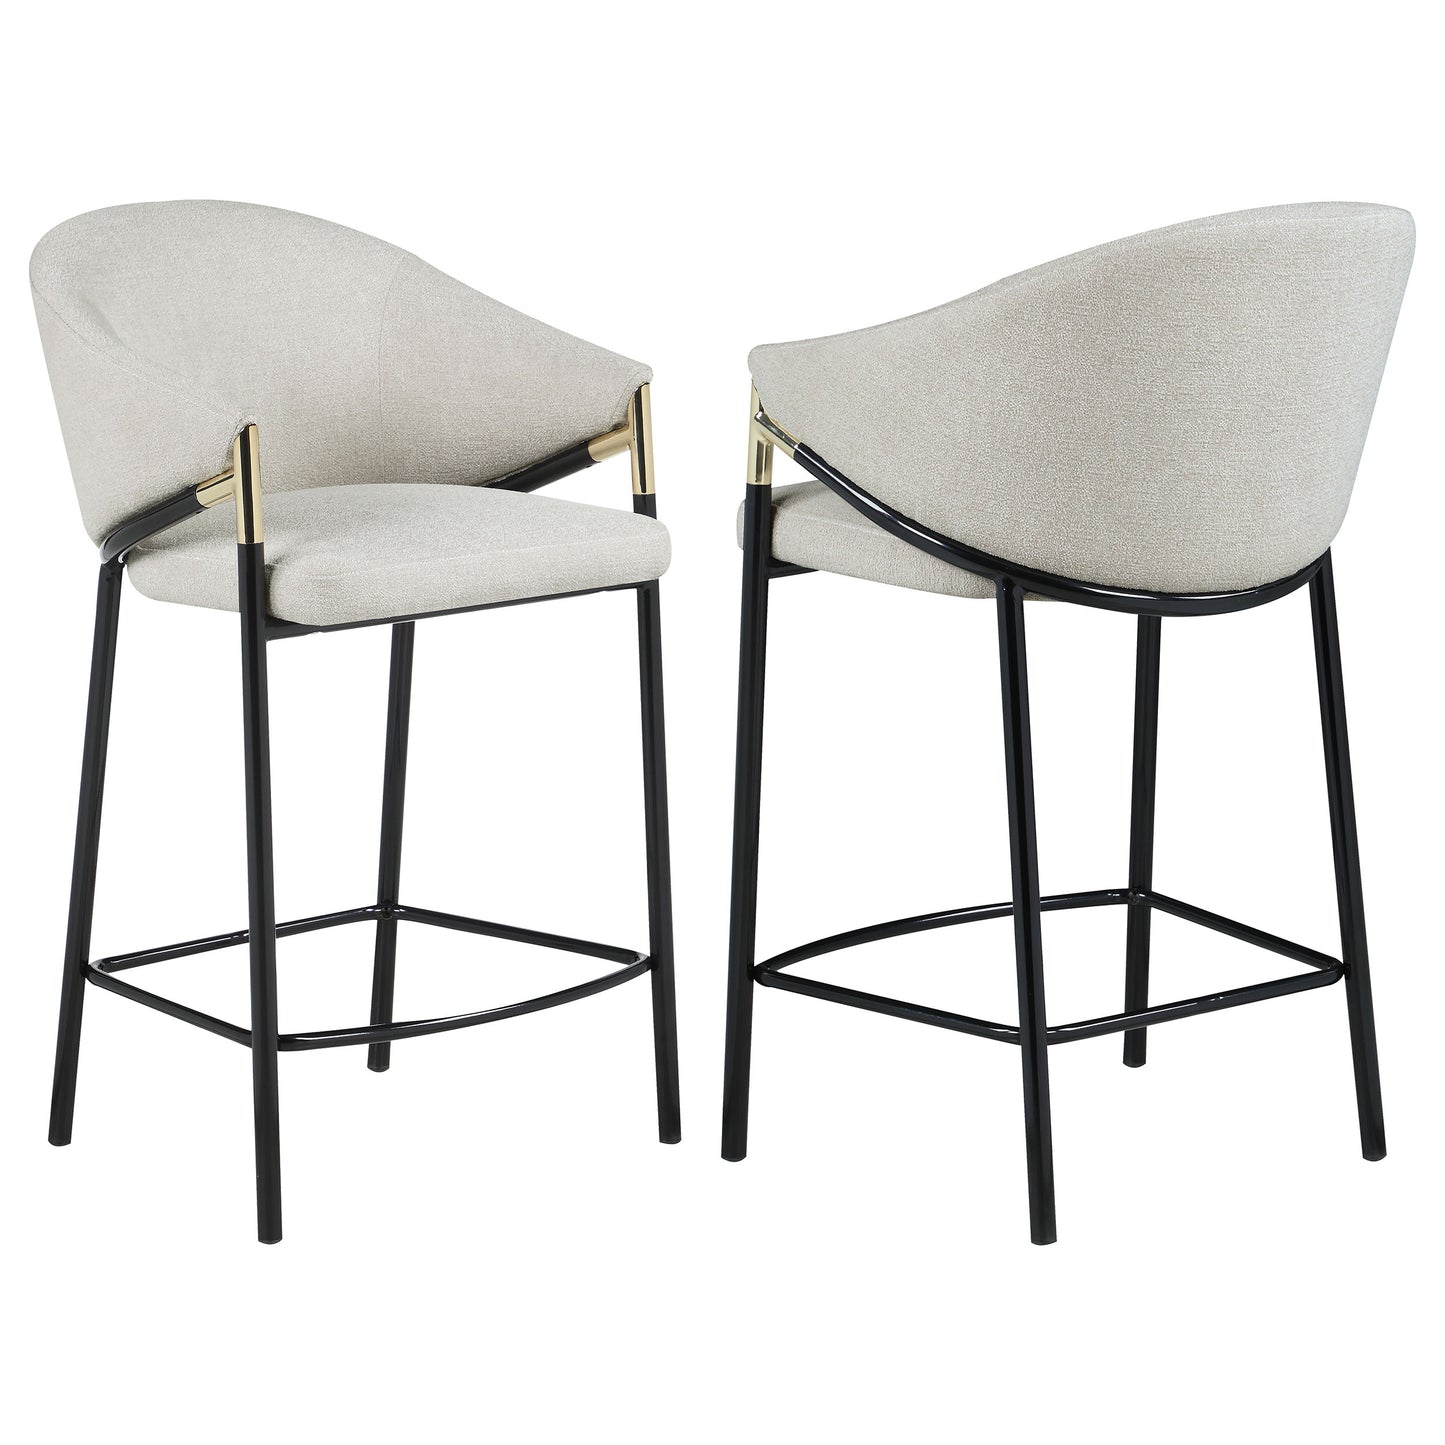 Chadwick Sloped Arm Counter Height Stools Beige and Glossy Black (Set of 2)